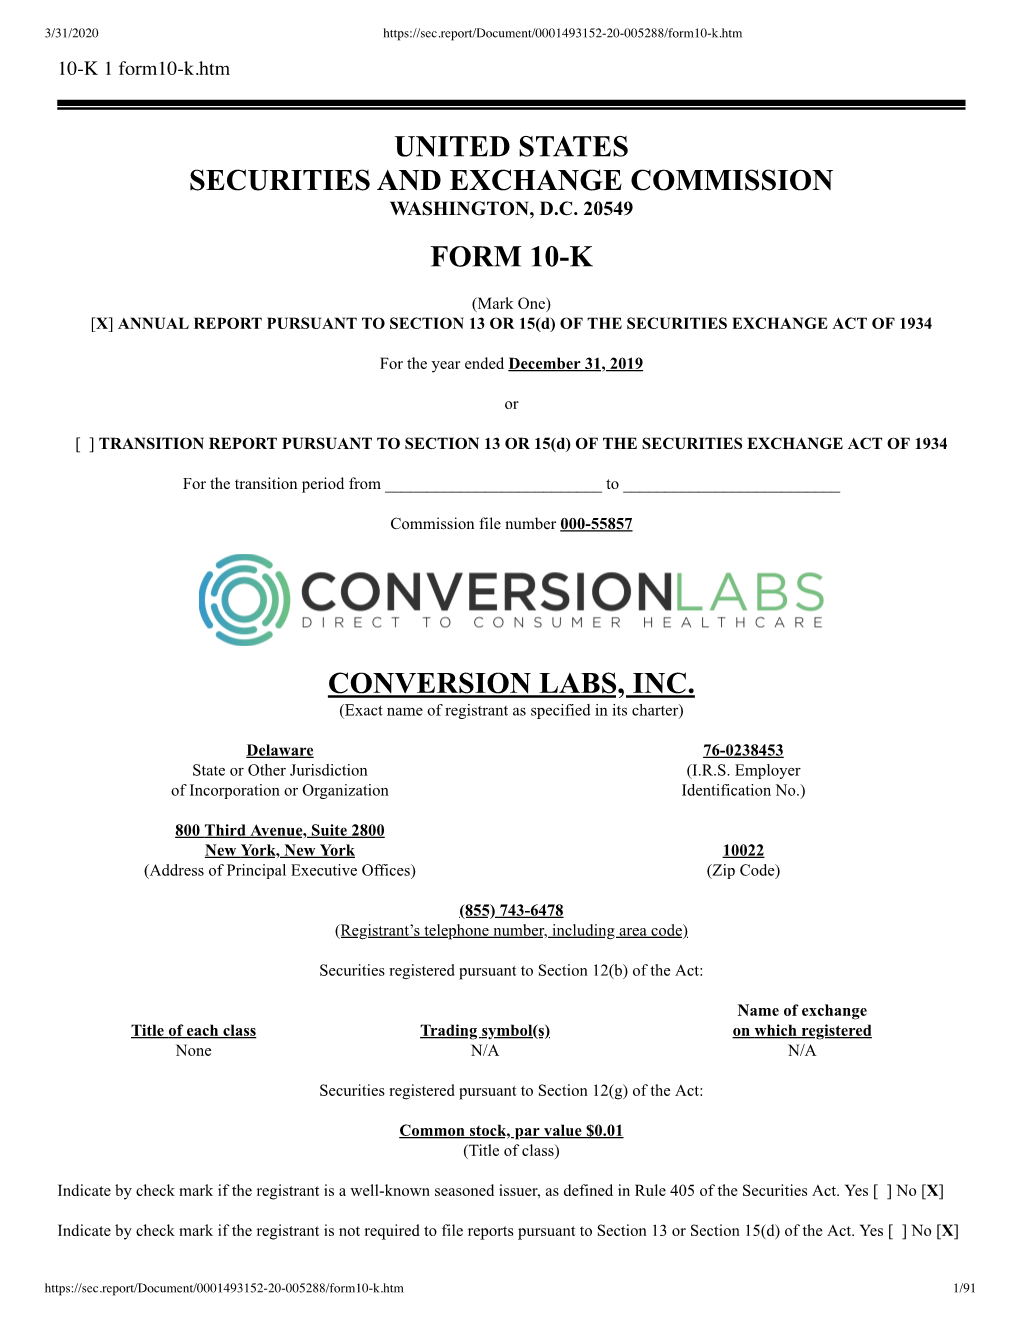 United States Securities and Exchange Commission Form 10-K Conversion Labs, Inc